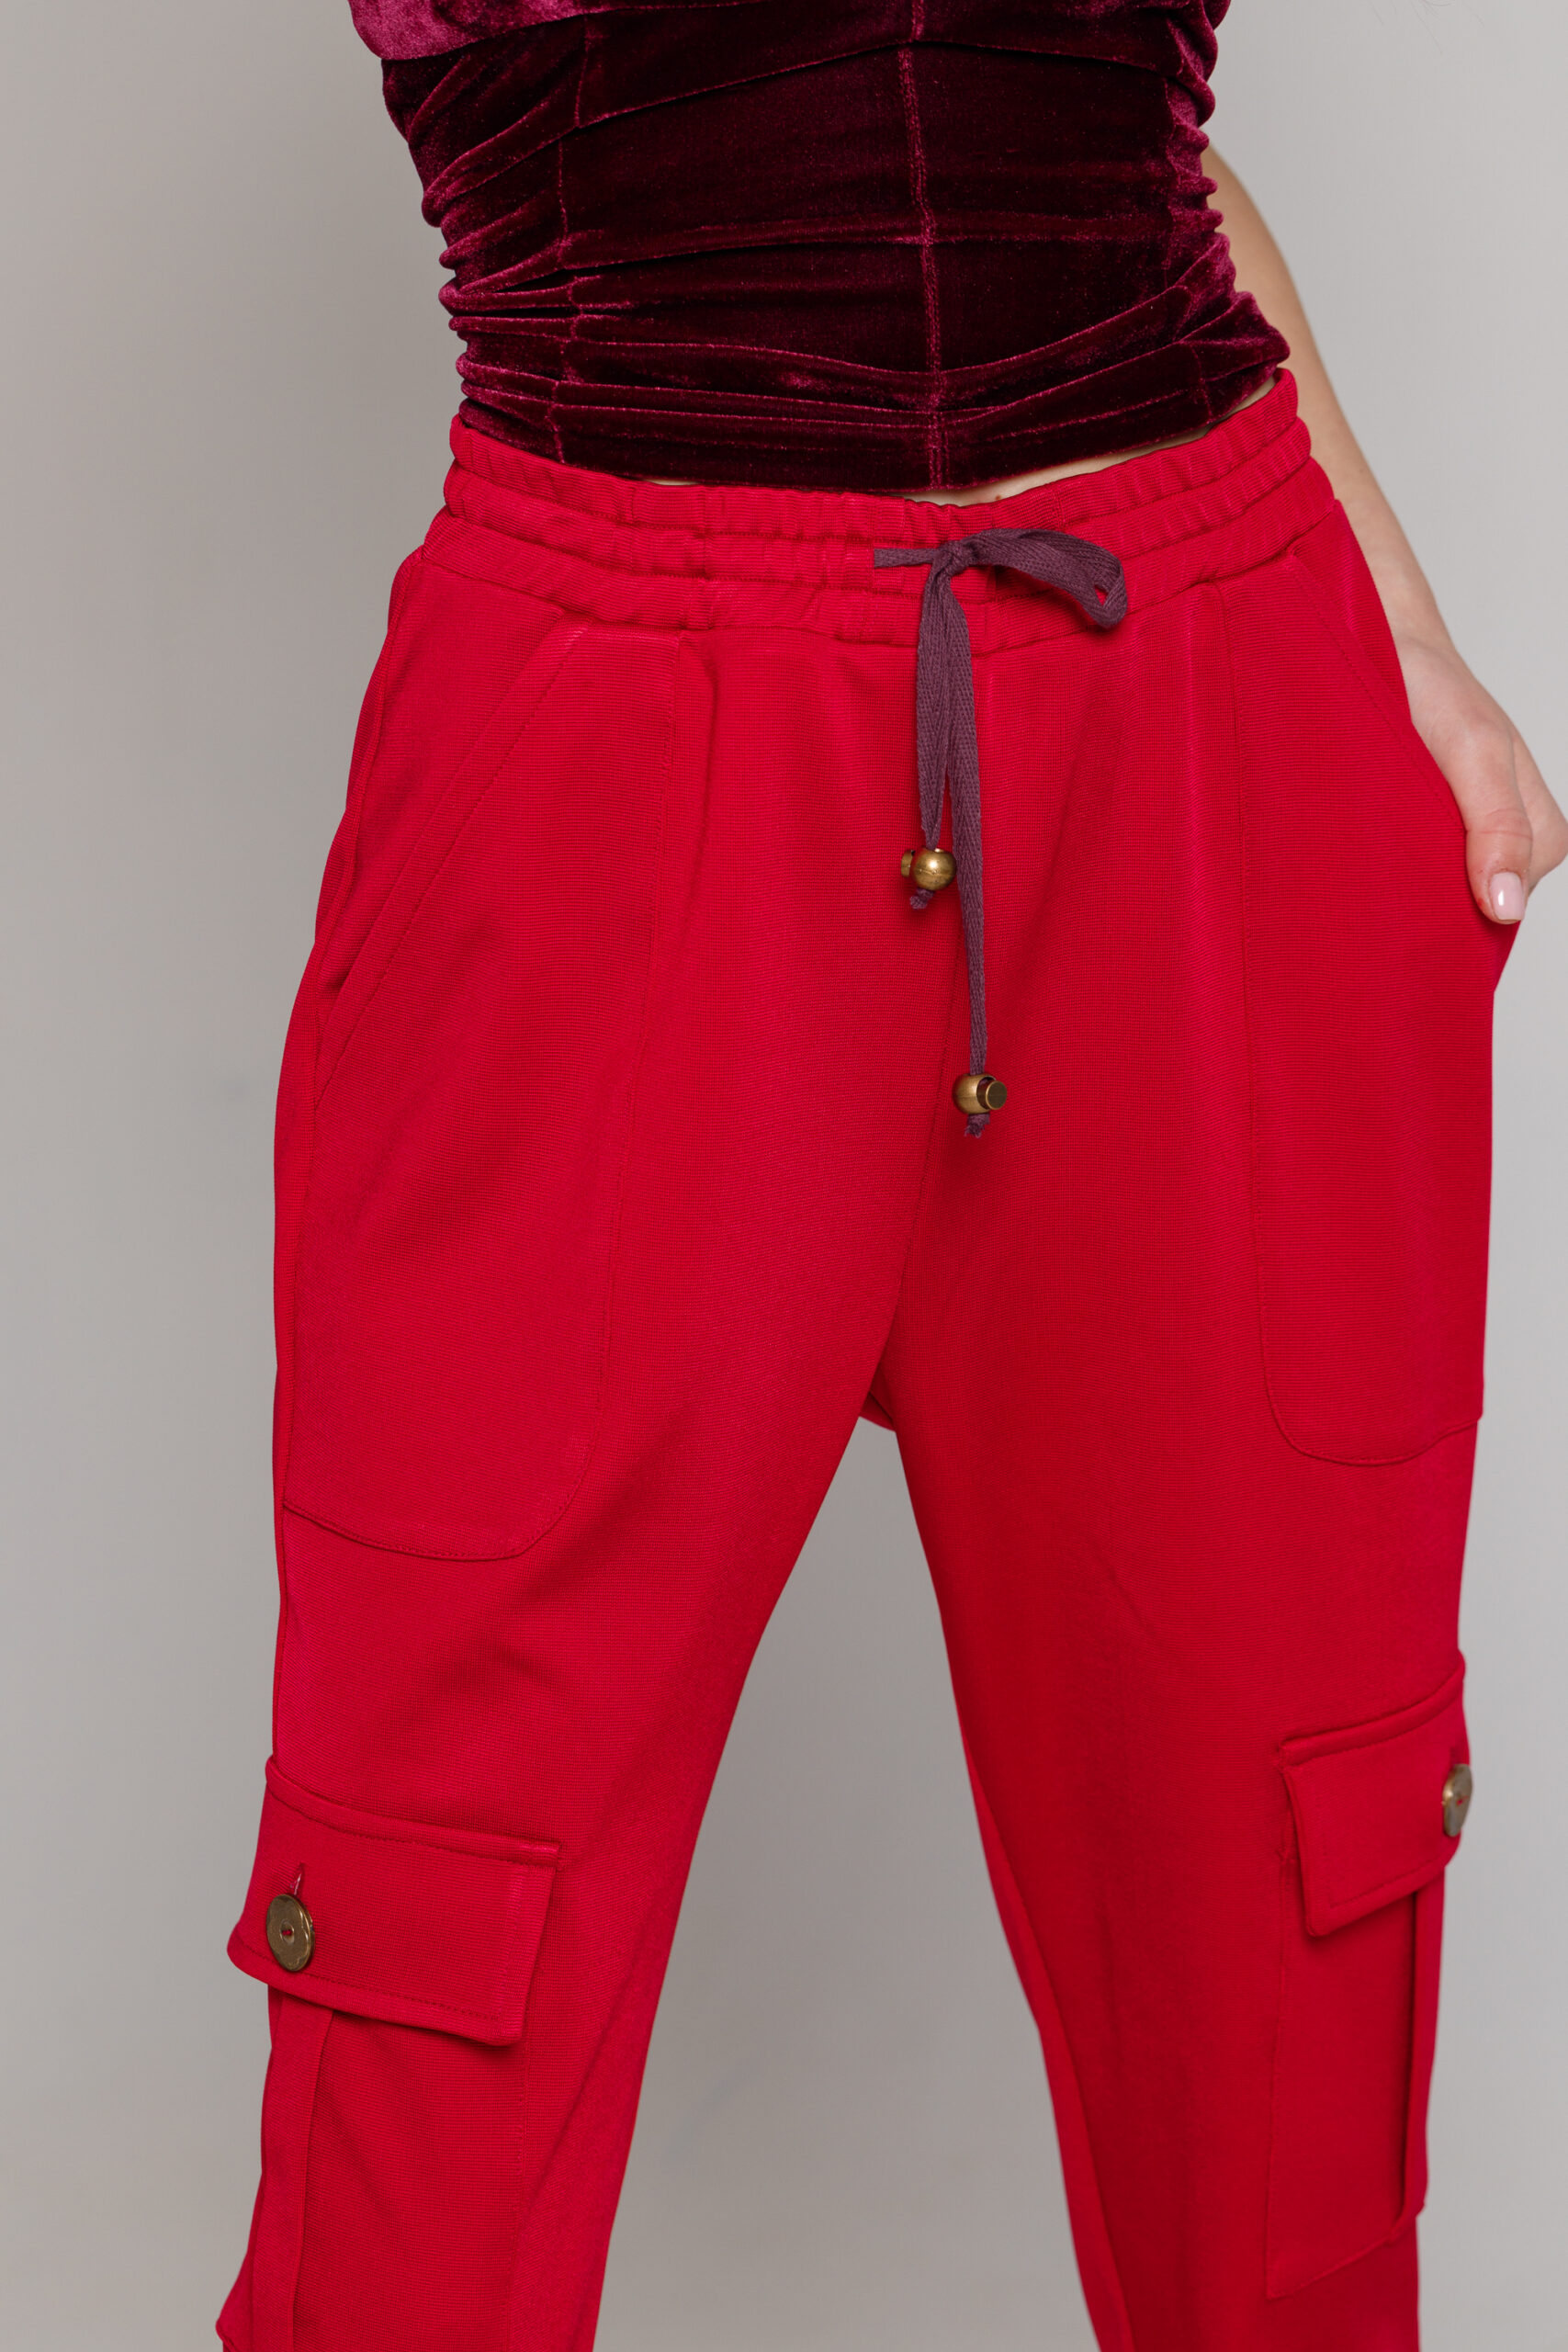 Burgundy VAN trousers with applied pockets. Natural fabrics, original design, handmade embroidery